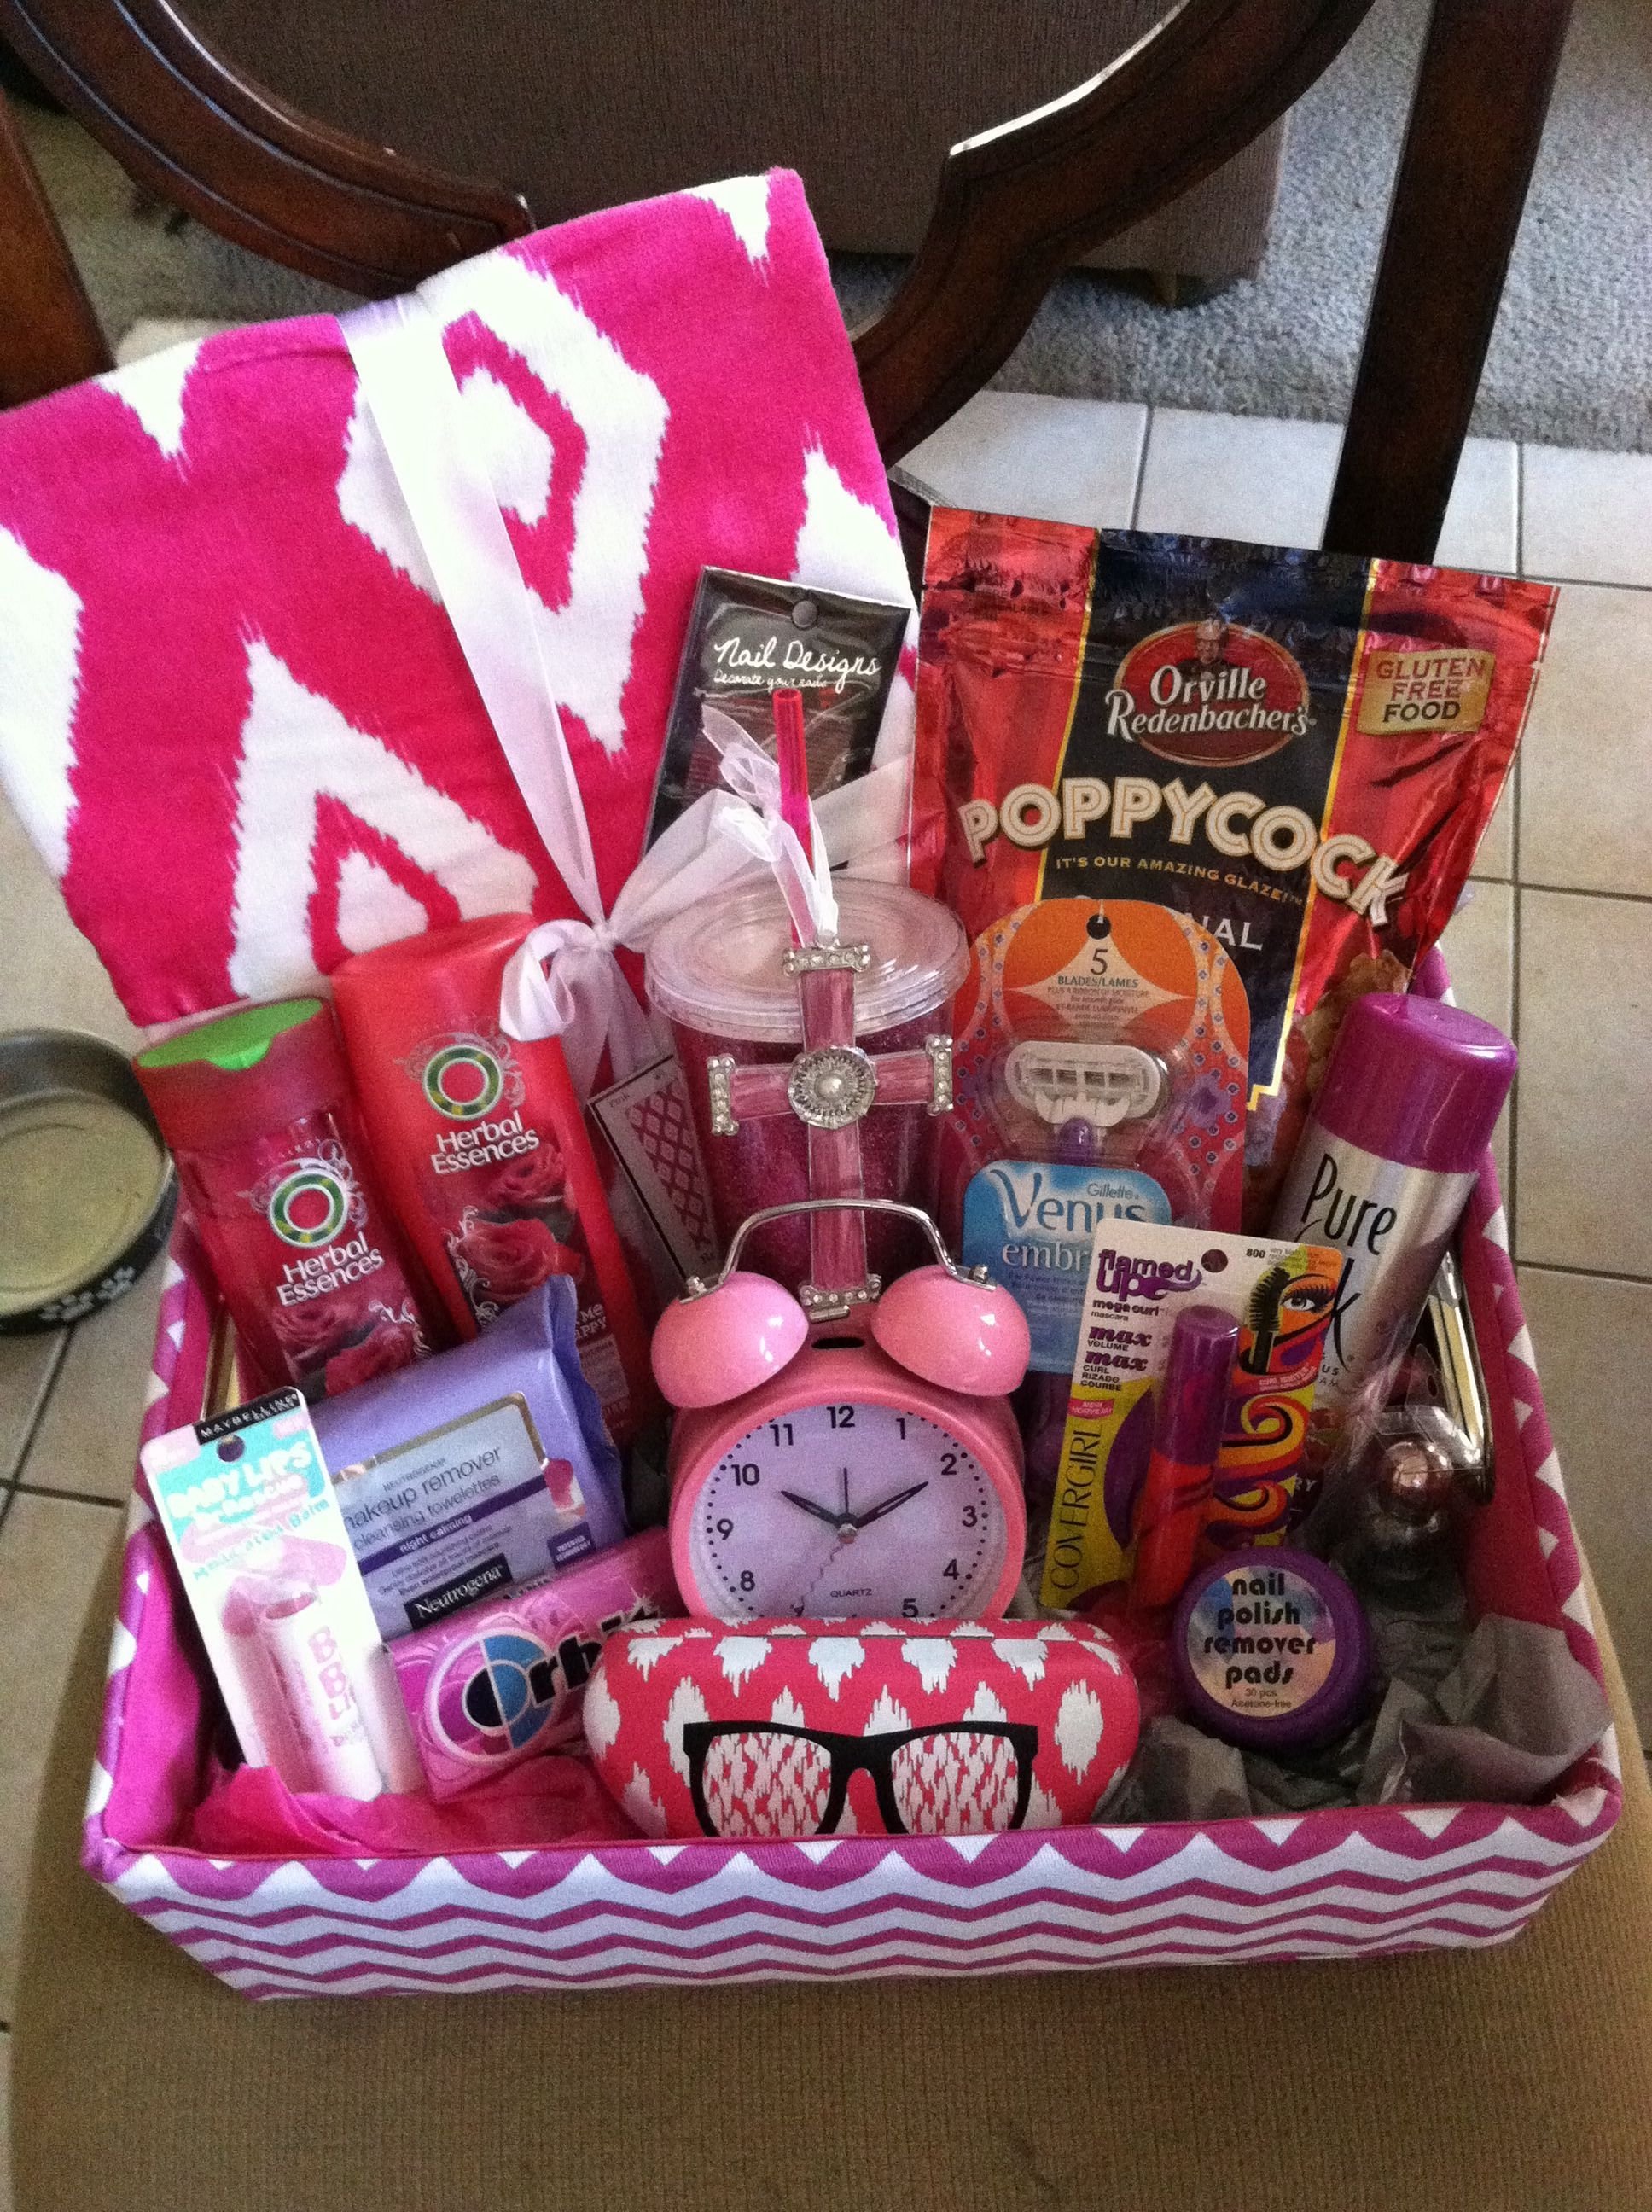 10 Awesome Gift Basket Ideas For Friend's 30th Birthday